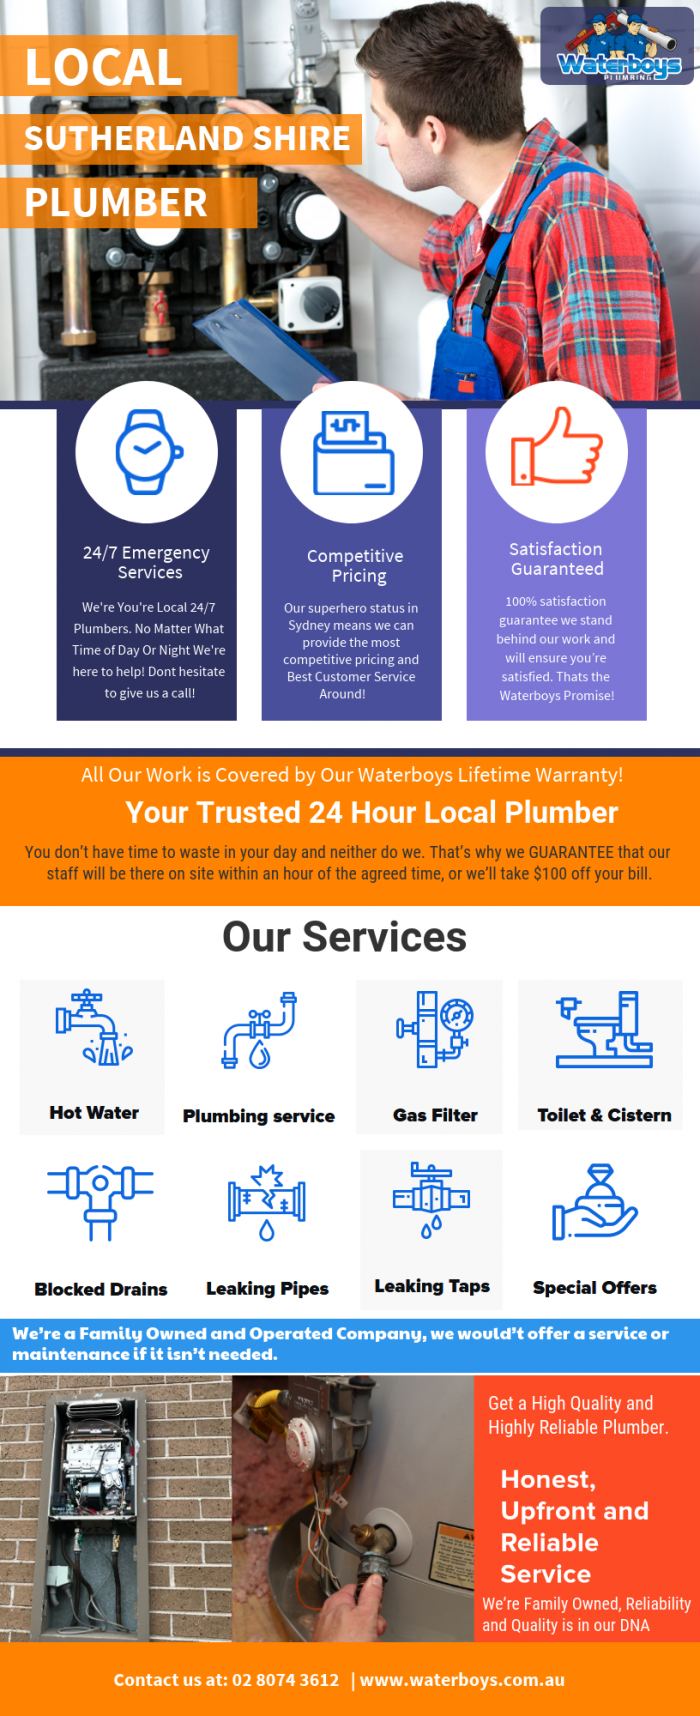 Local Sutherland Shire Plumber